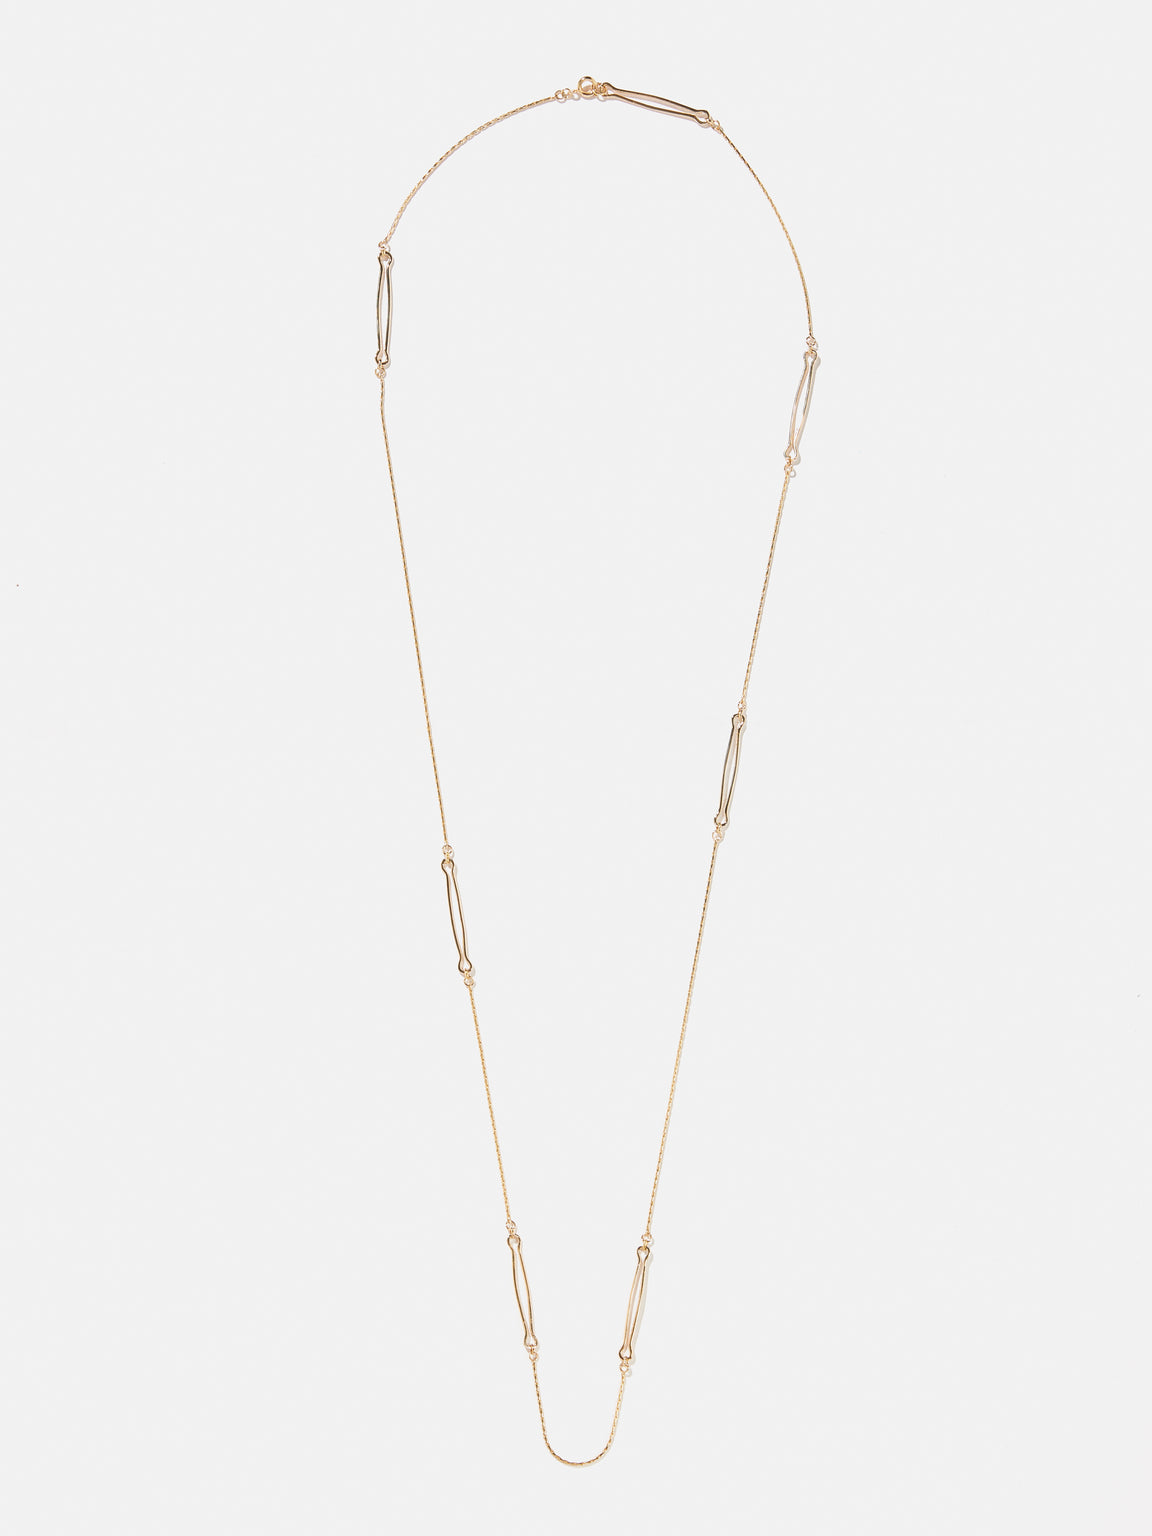 HELENA ROHNER | FINE GOLD PLATED BRASS LINKS LONG NECKLACE GOLD